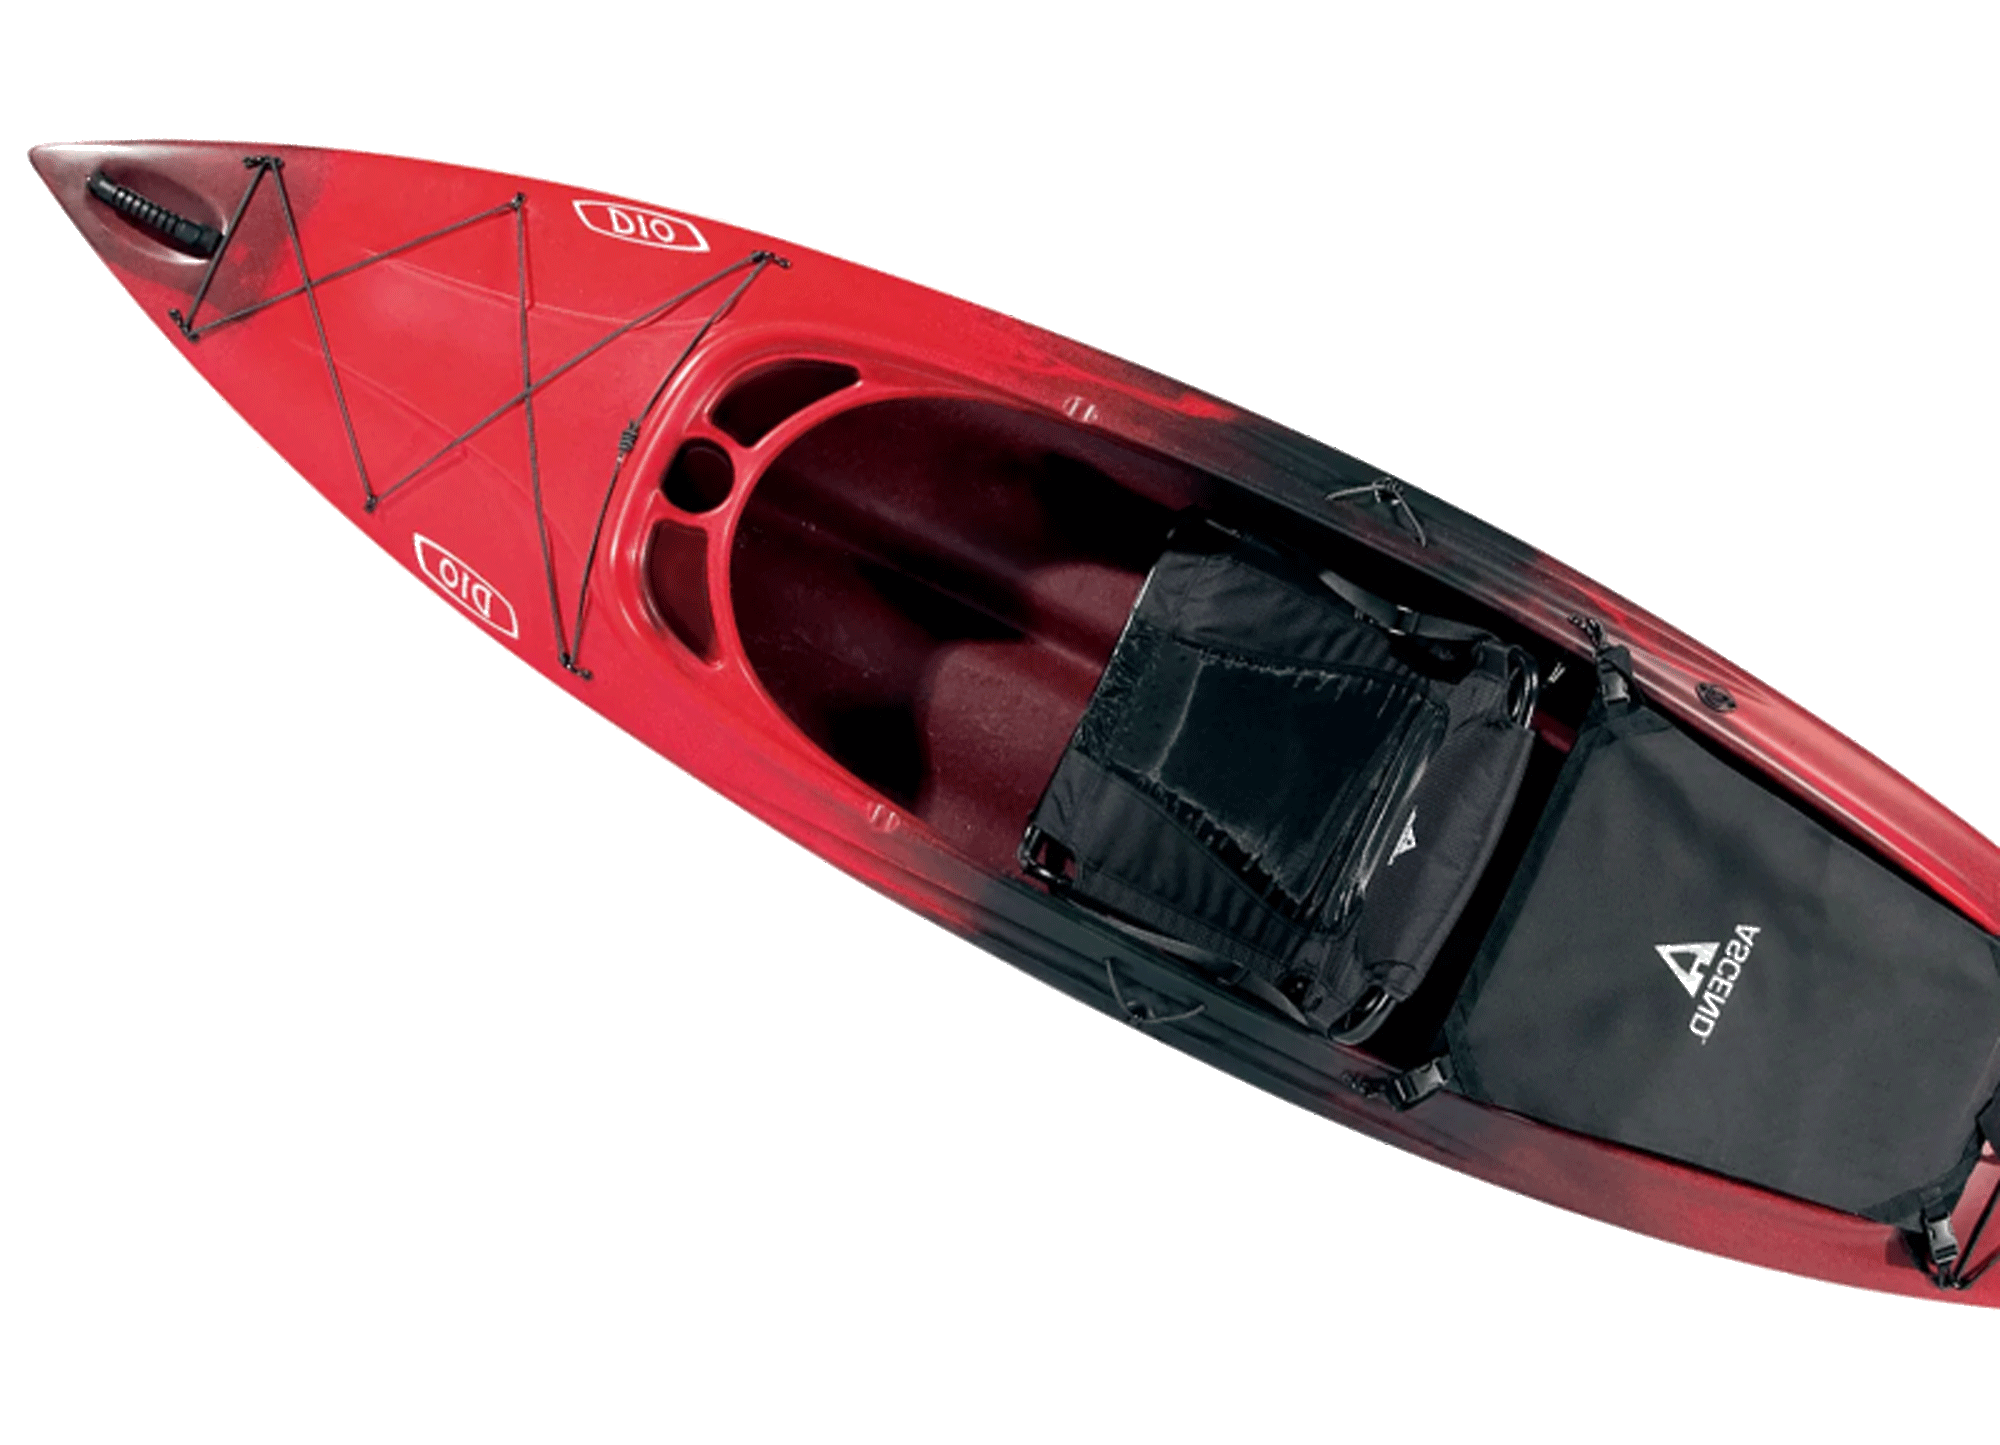 Ascend 128X or 133X Sit-On-Top Kayak Seat